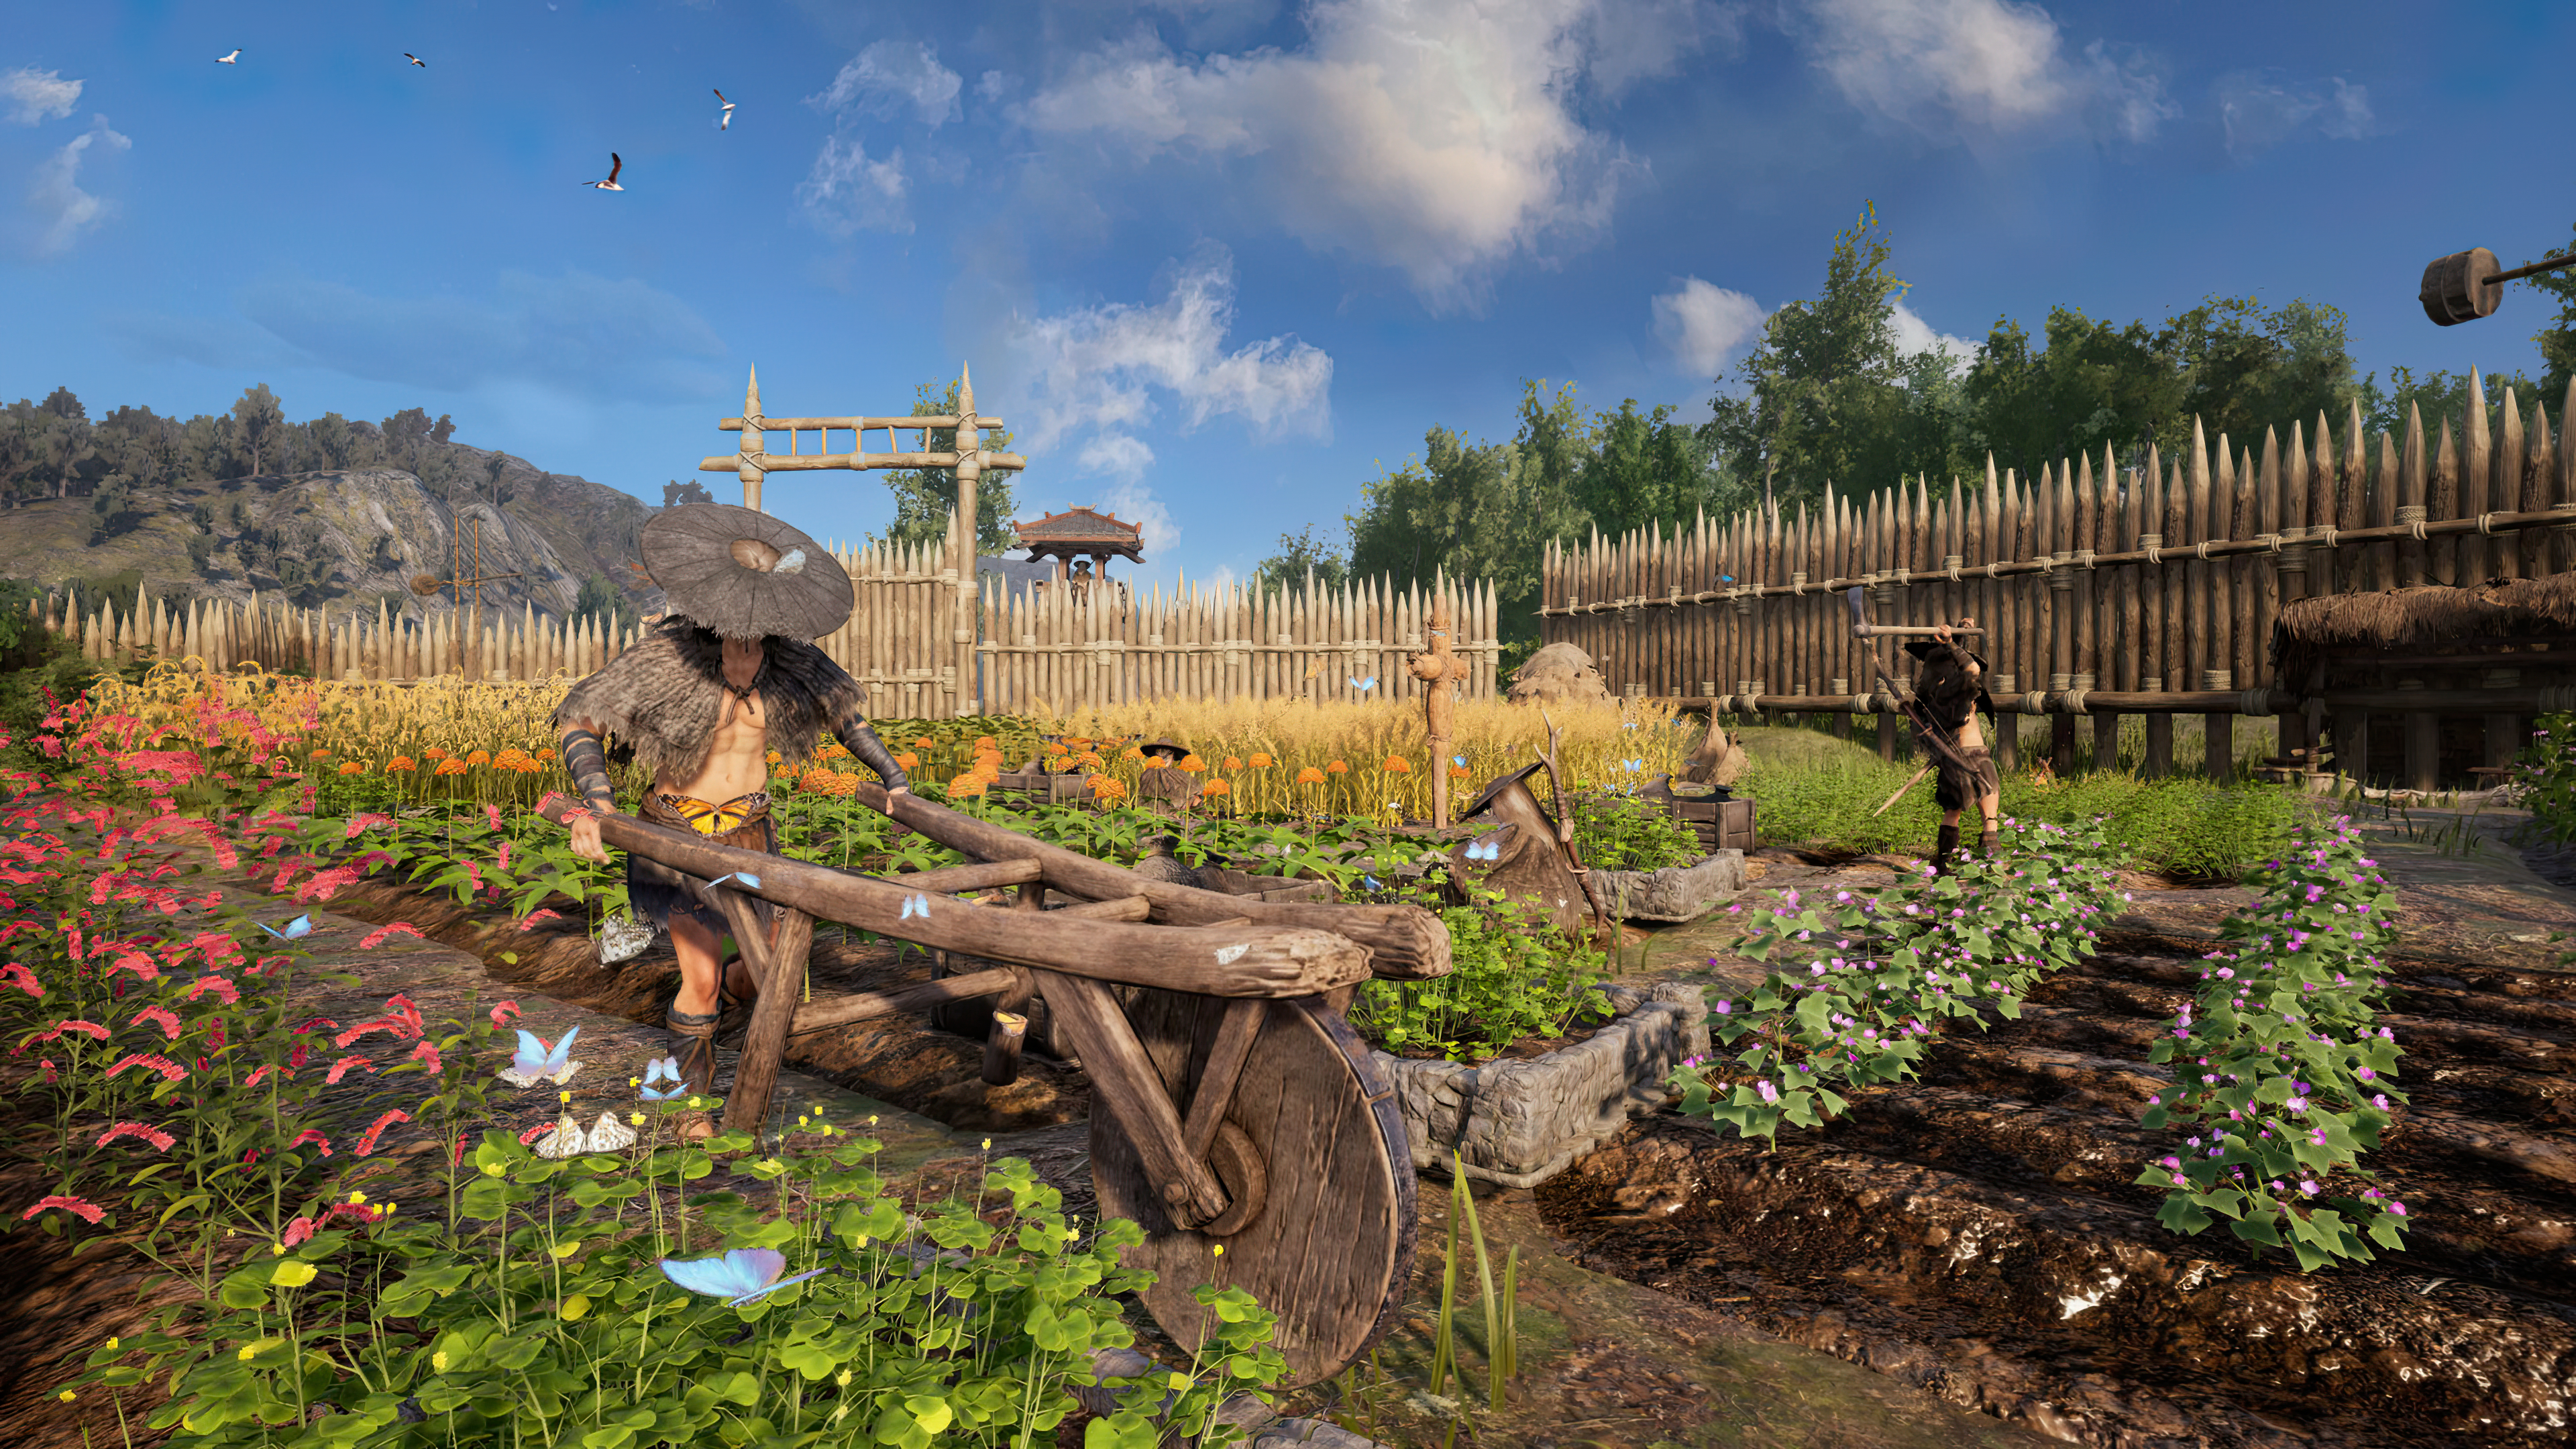 HD desktop wallpaper featuring a vibrant garden scene from Myth of Empires with characters tending to crops and a wooden fortress in the background.